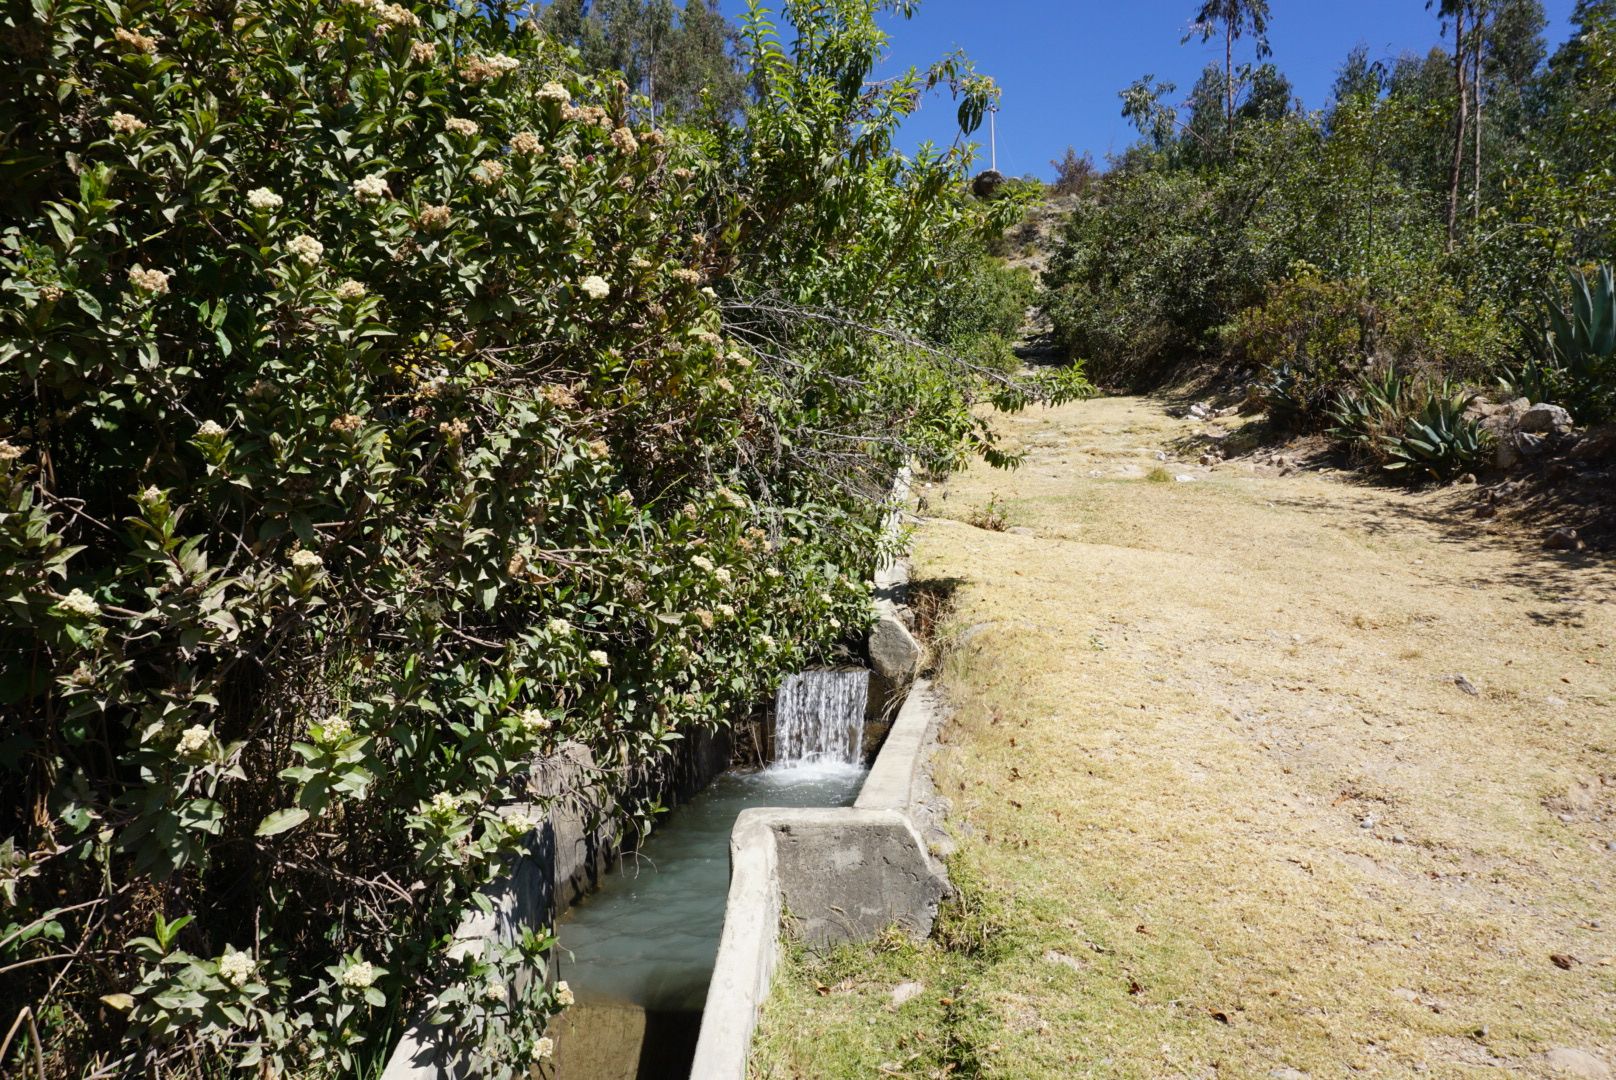 One of the canals that delivers water to nearby communities. Water is intended to flow to the top of the cement walls. Image by Audrey Fromson. Peru, 2019.